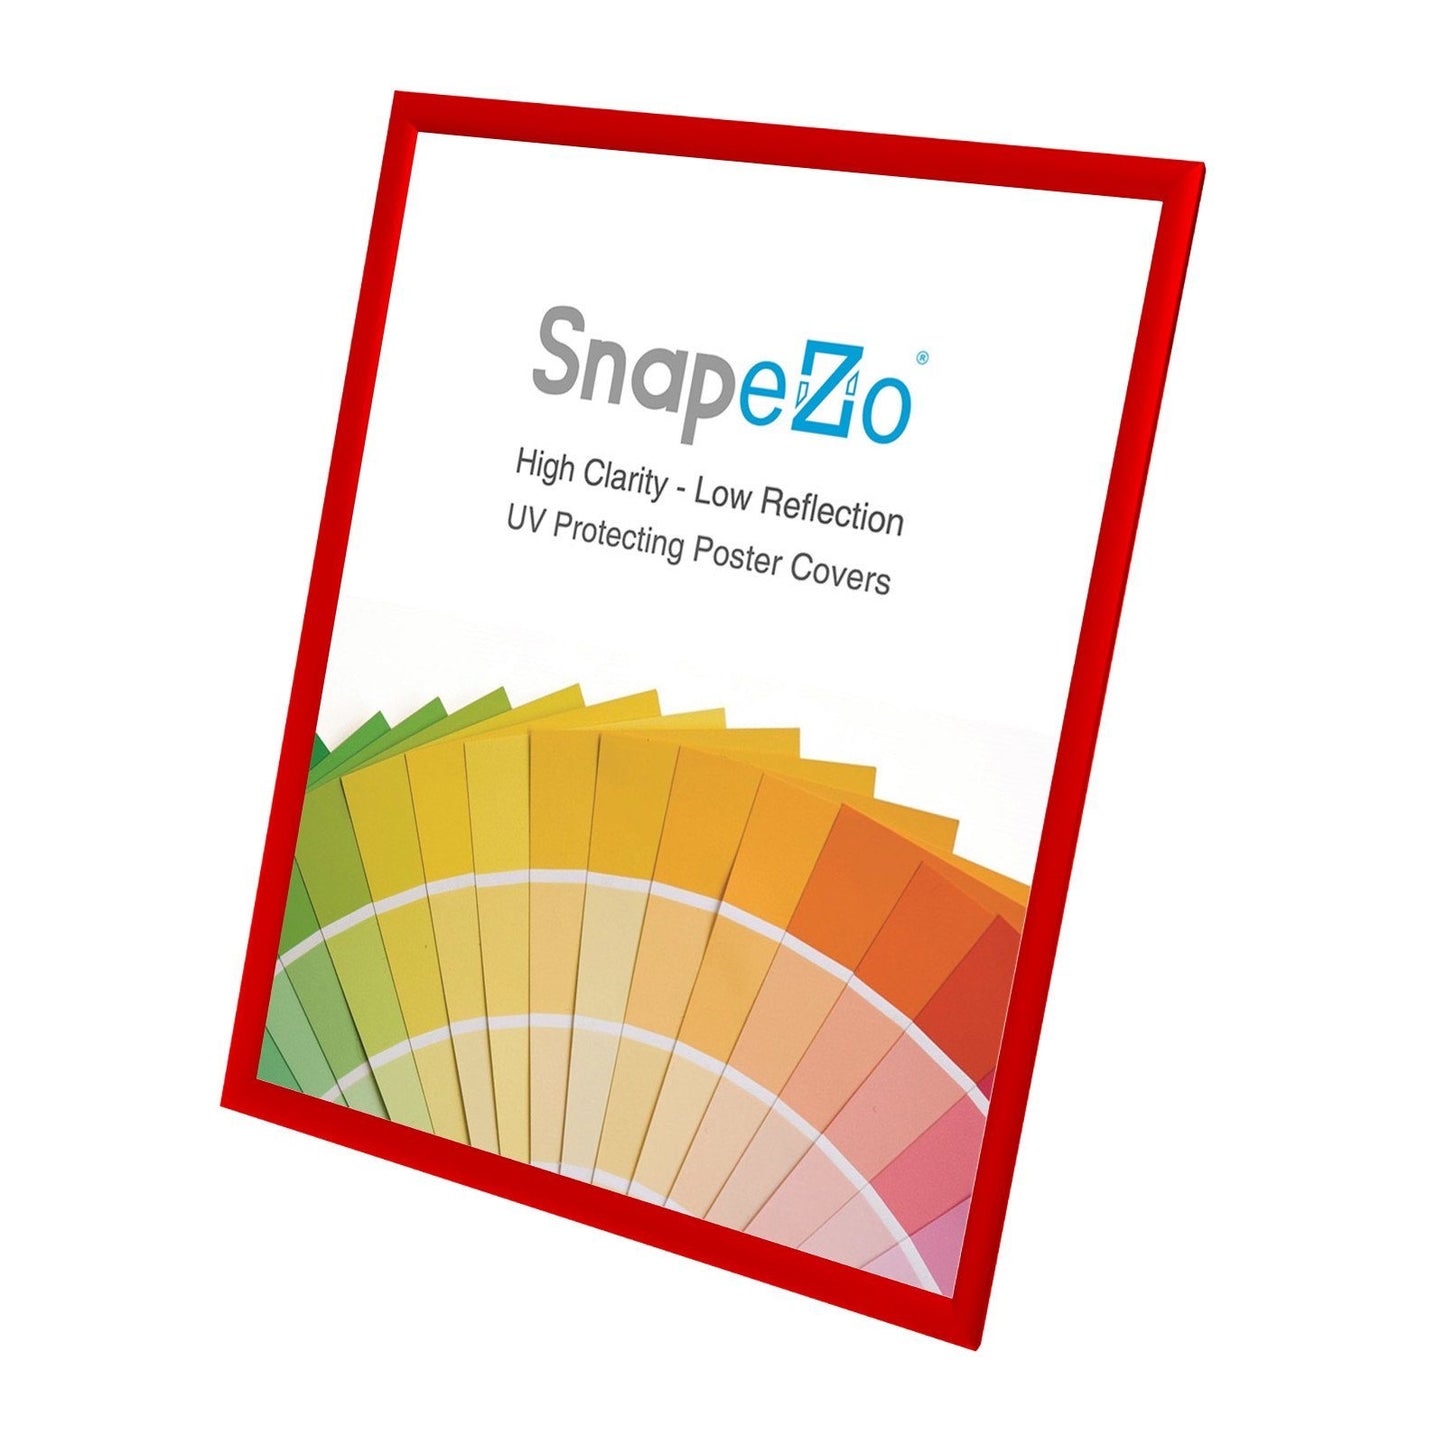 28x32 Red SnapeZo® Snap Frame - 1.2 Inch Profile